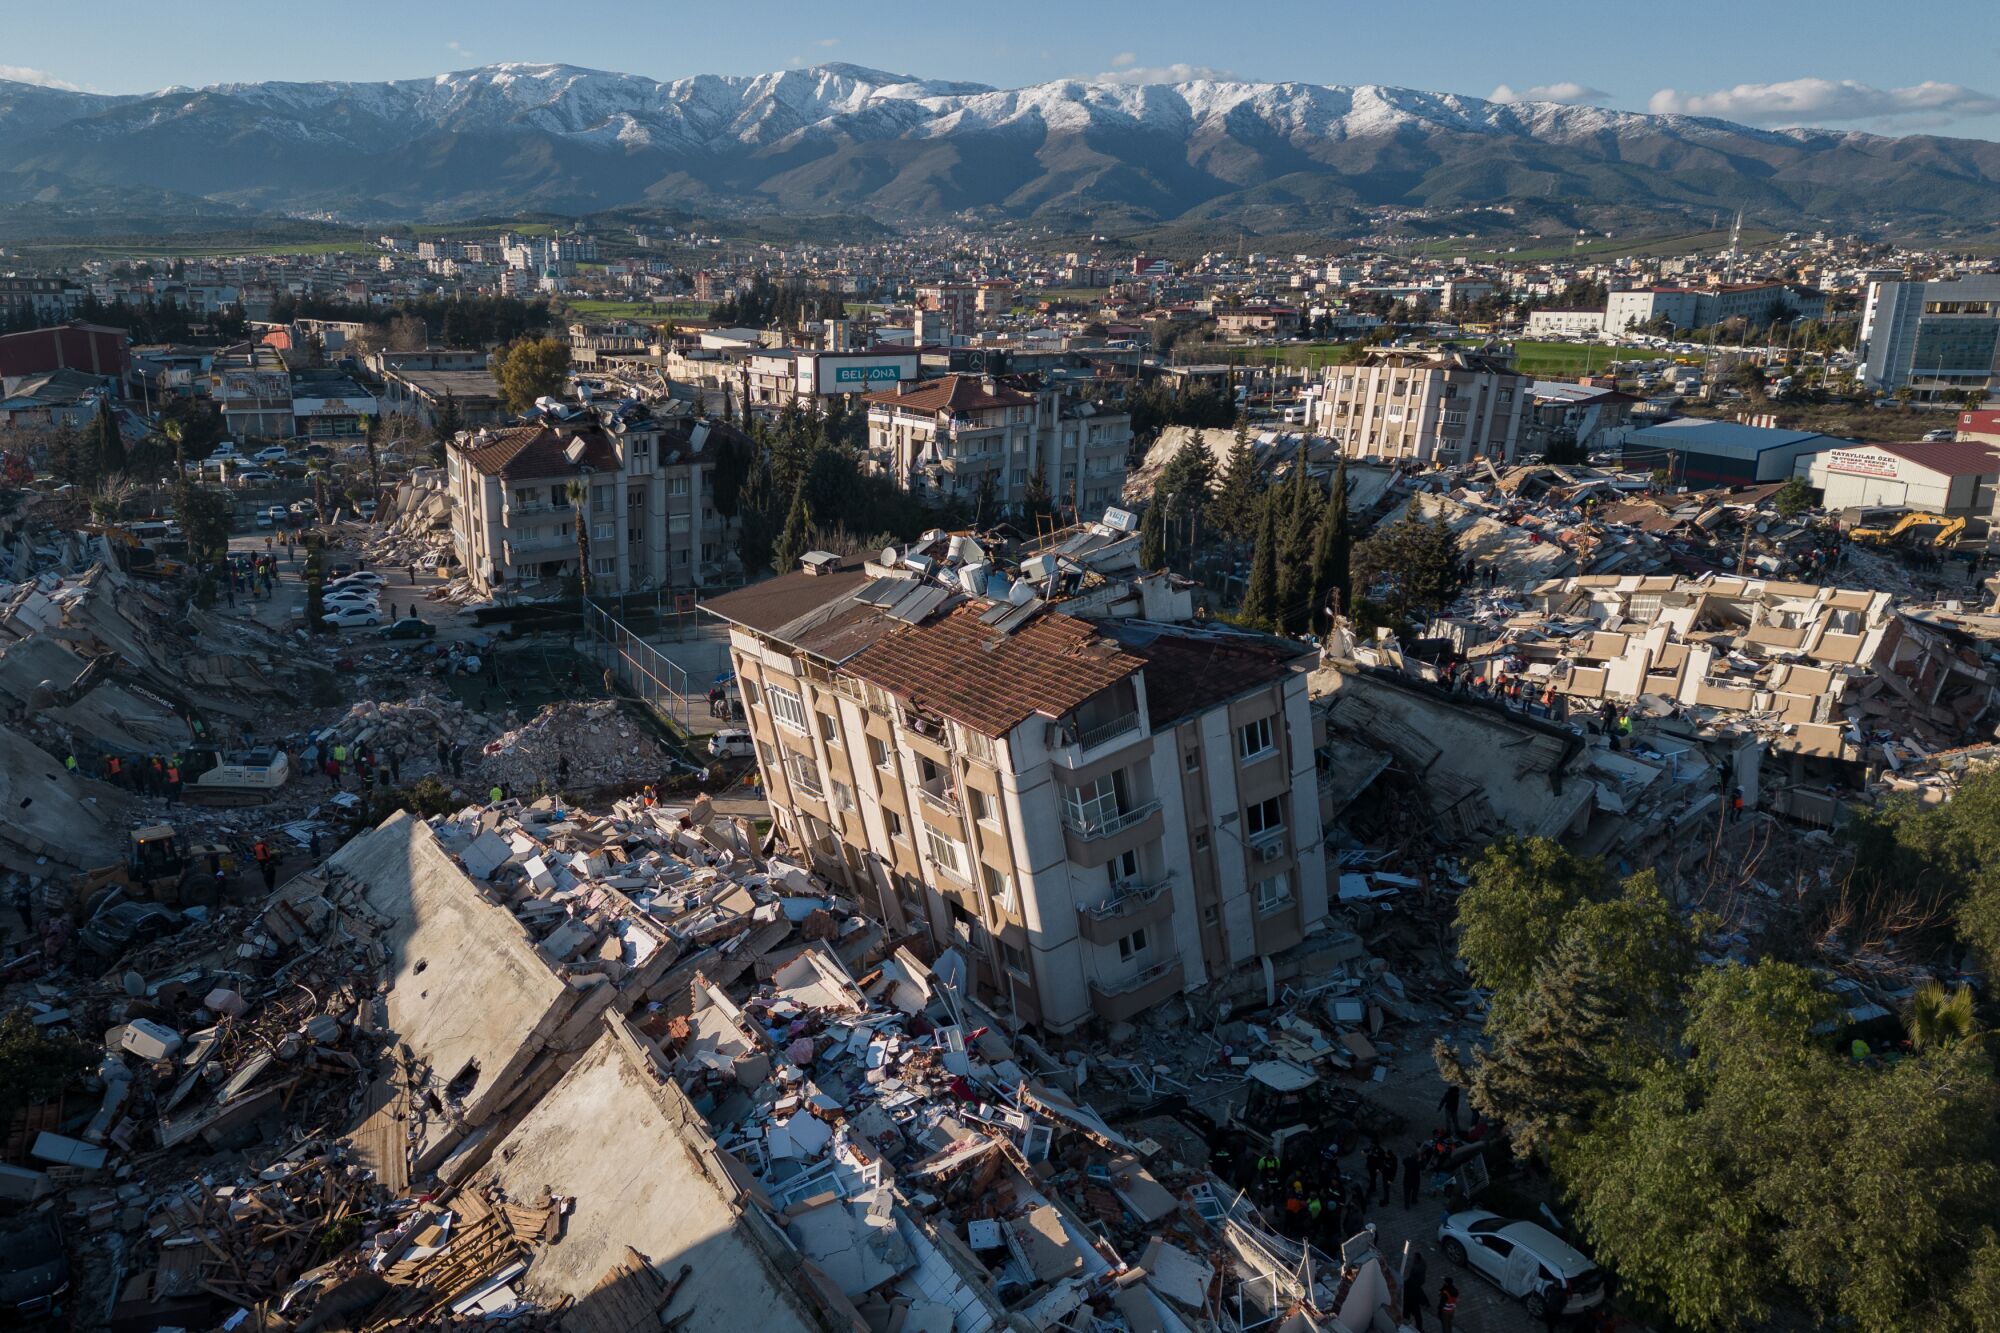 General view of buildings destroyed in the recent earthquake in Antakya, Turkey